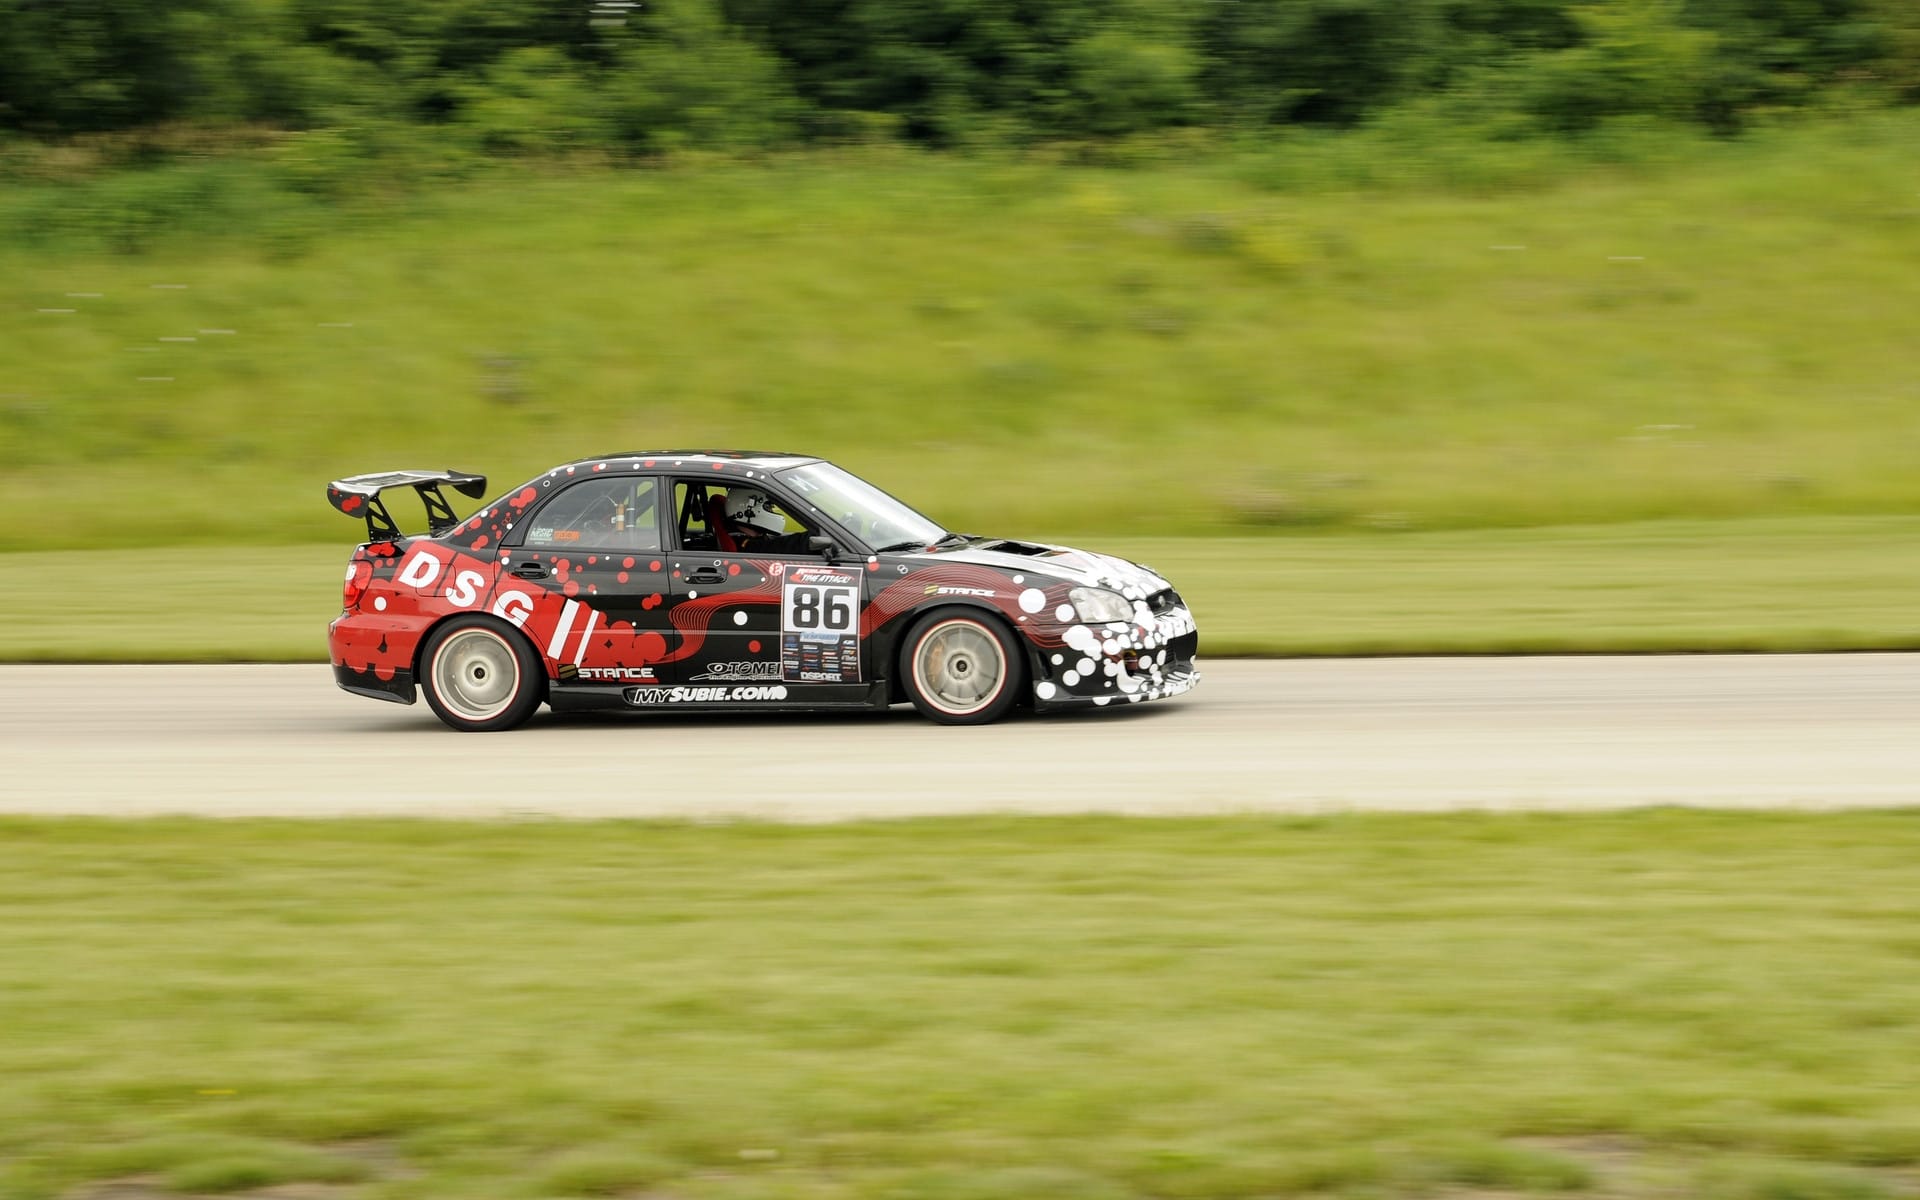 The "RASpec Impreza 1.0" racing at Summit Point in the Redline Time Attack series, 2010.